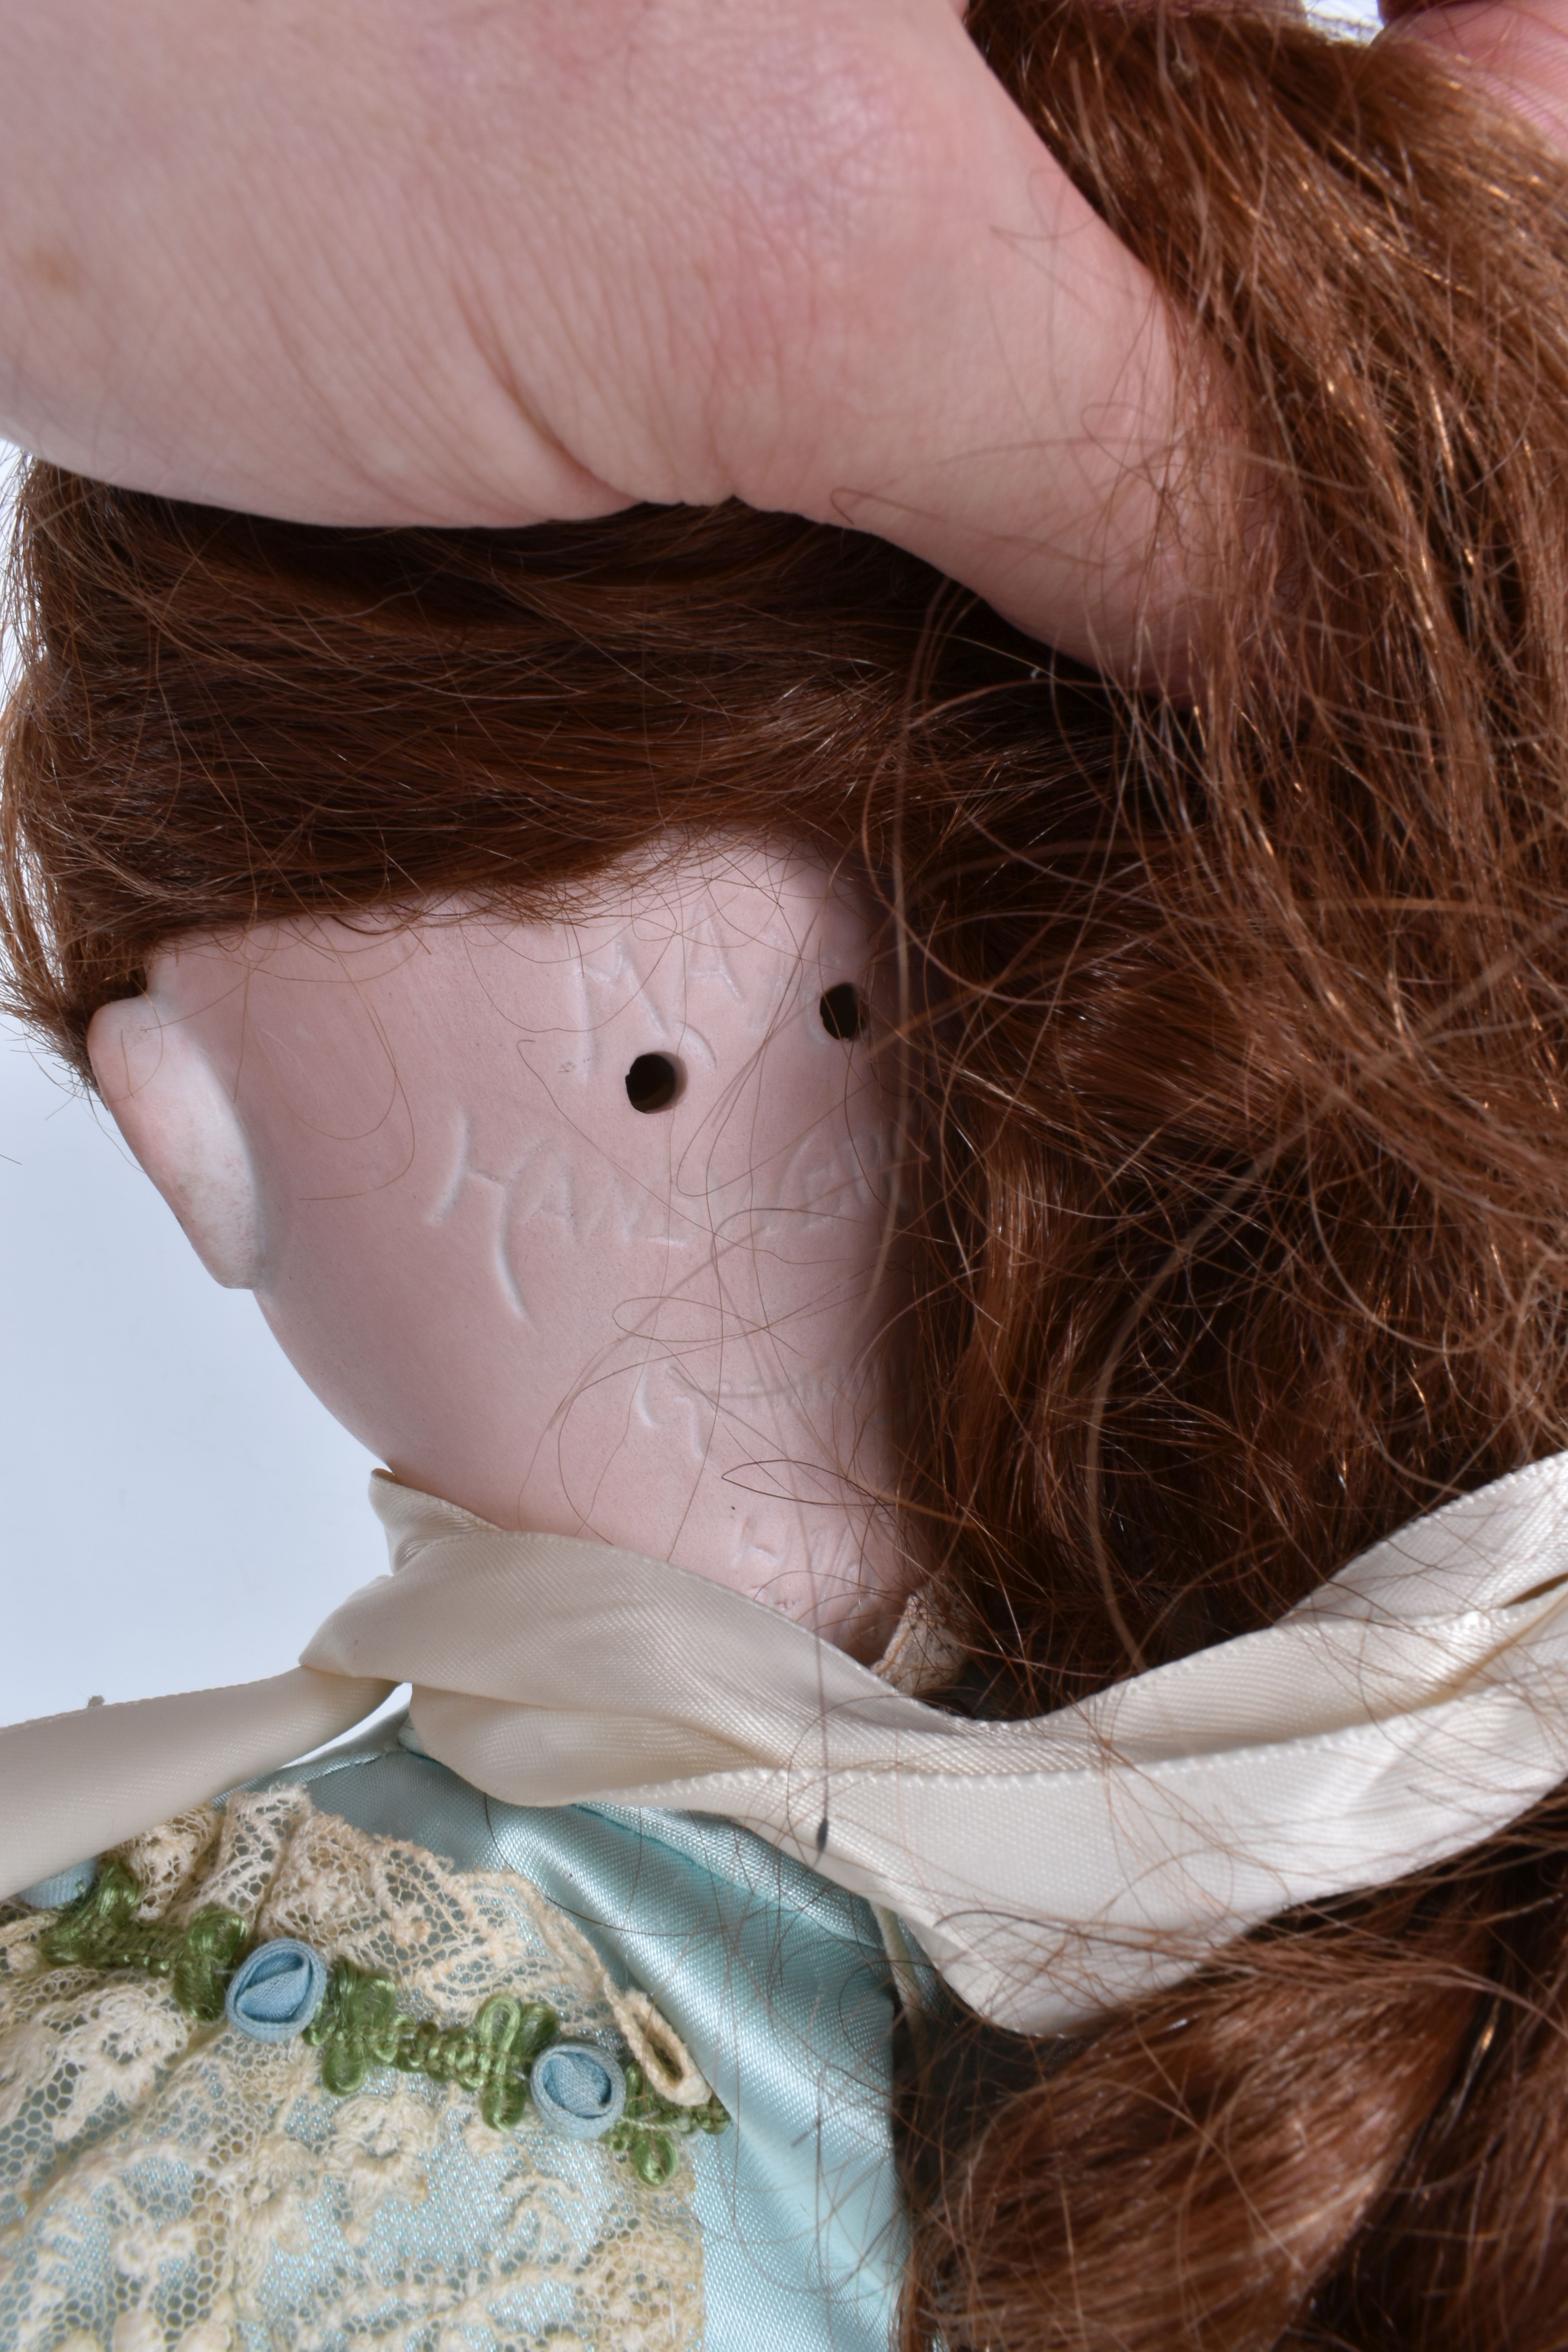 A MAX HANDWERCK BISQUE HEAD DOLL, nape of neck marked 'Max Handwerck Germany 7½', sleeping blue - Image 12 of 12